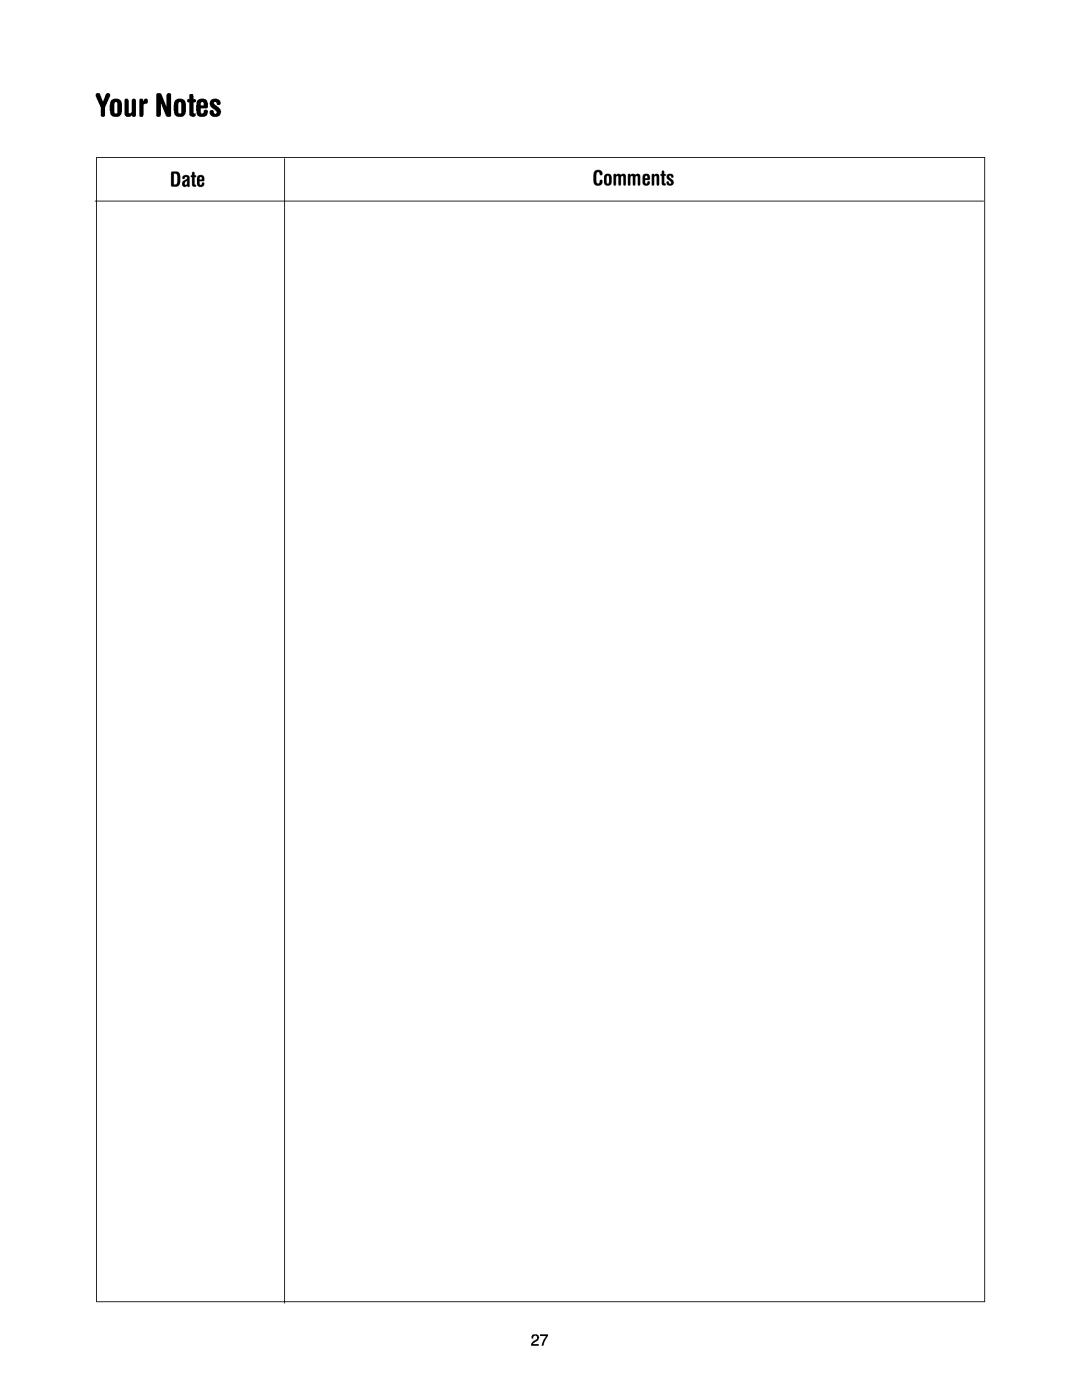 Yard-Man 31AH553G401 manual Your Notes, Date, Comments 